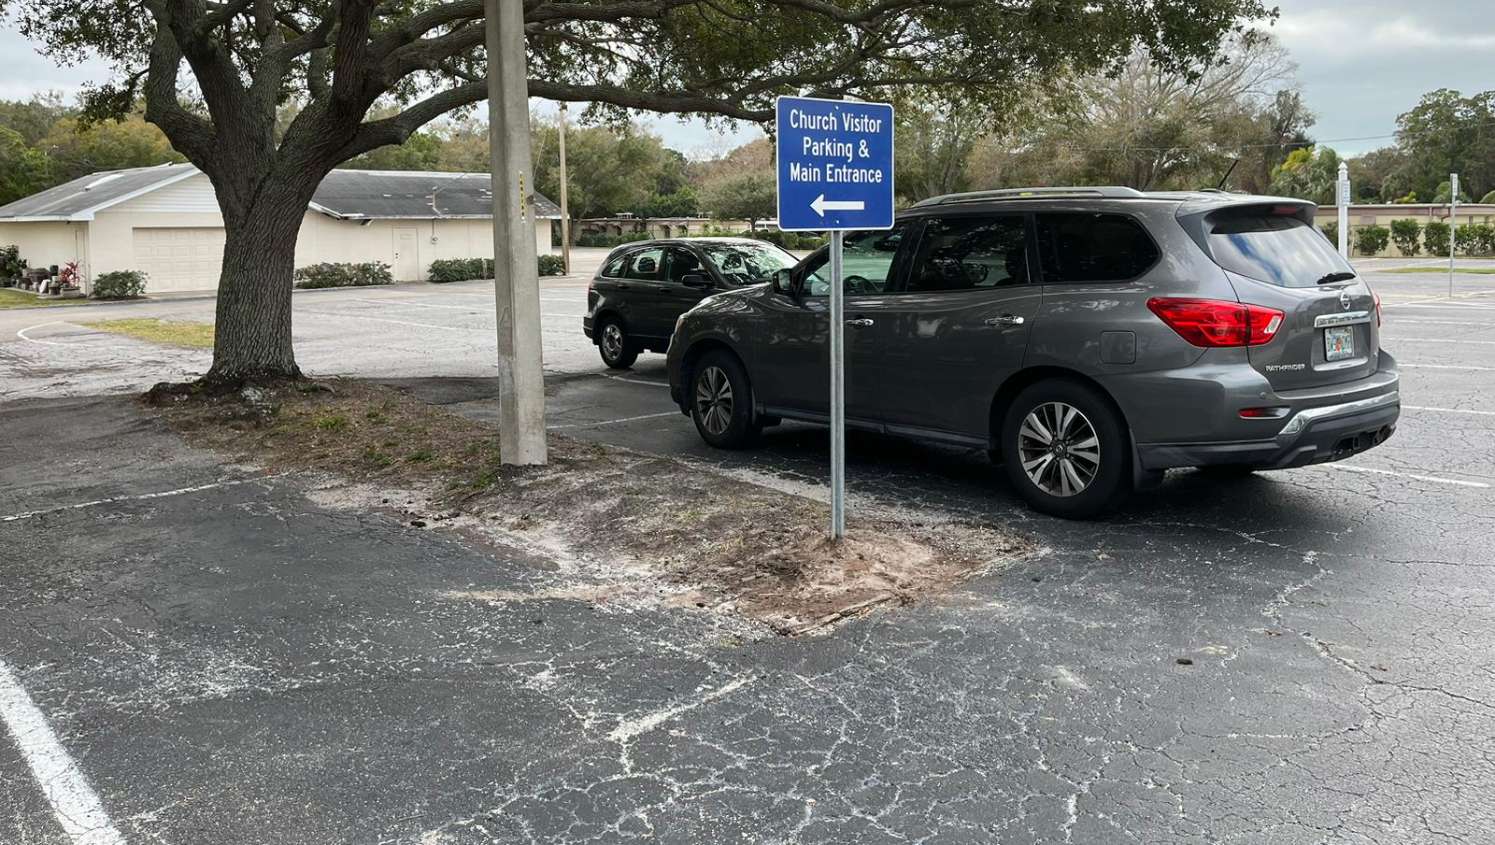 new visitor sign in florida parking lot